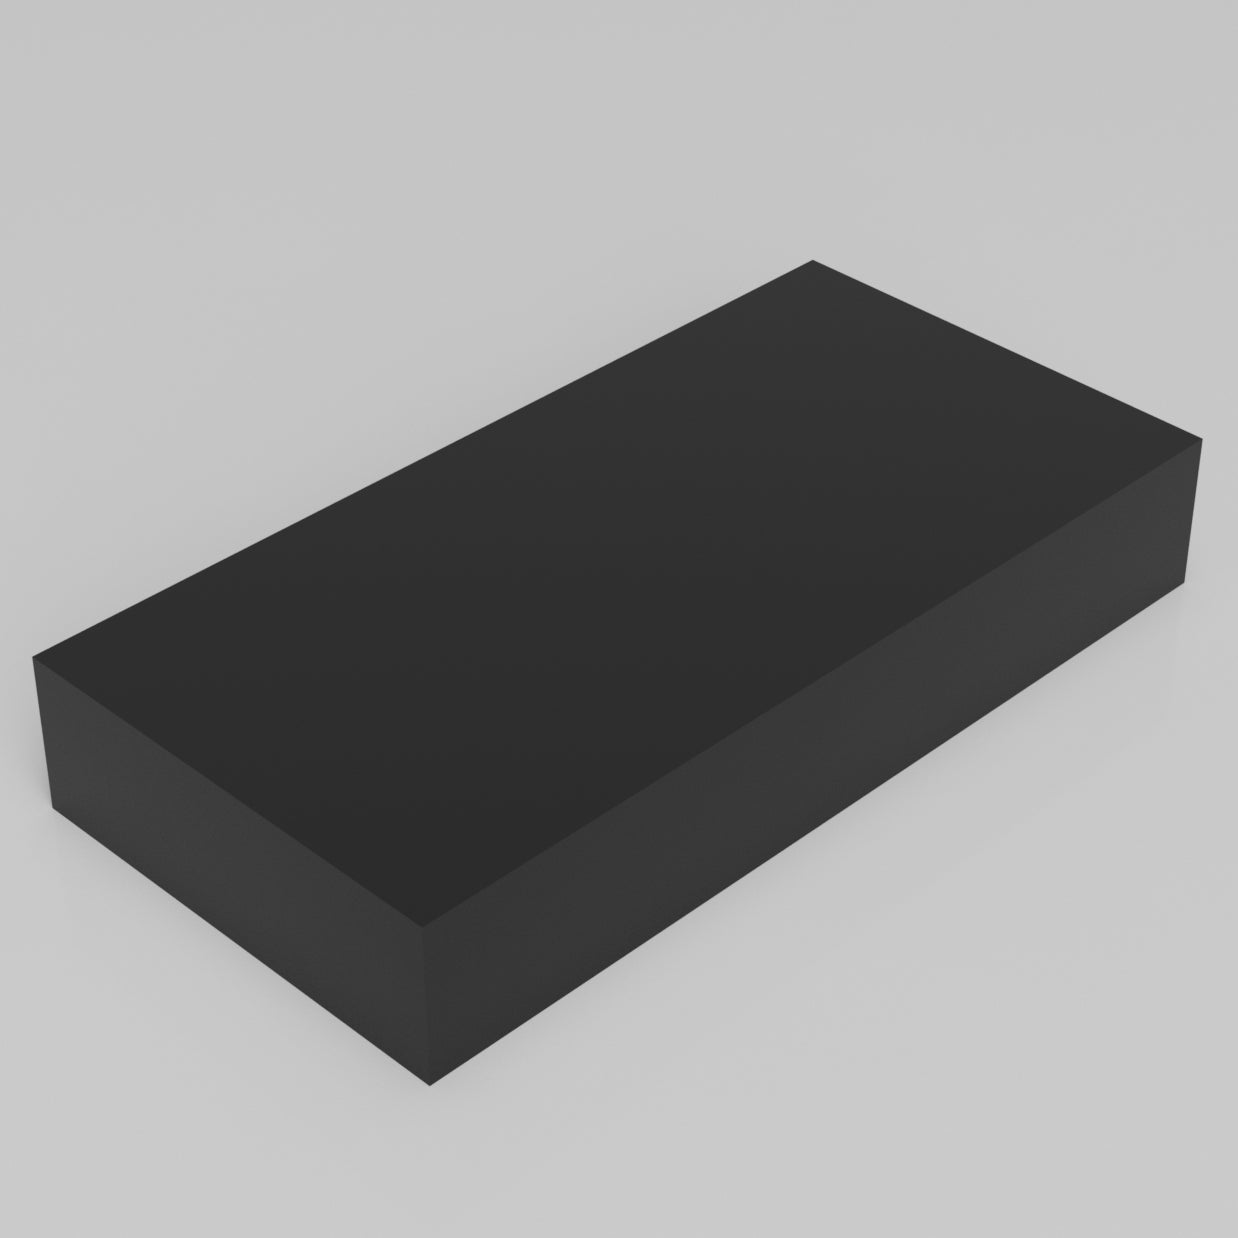 Machinable Wax Rectangular Block Front View 1 Inch by 3 Inch by 6 Inch